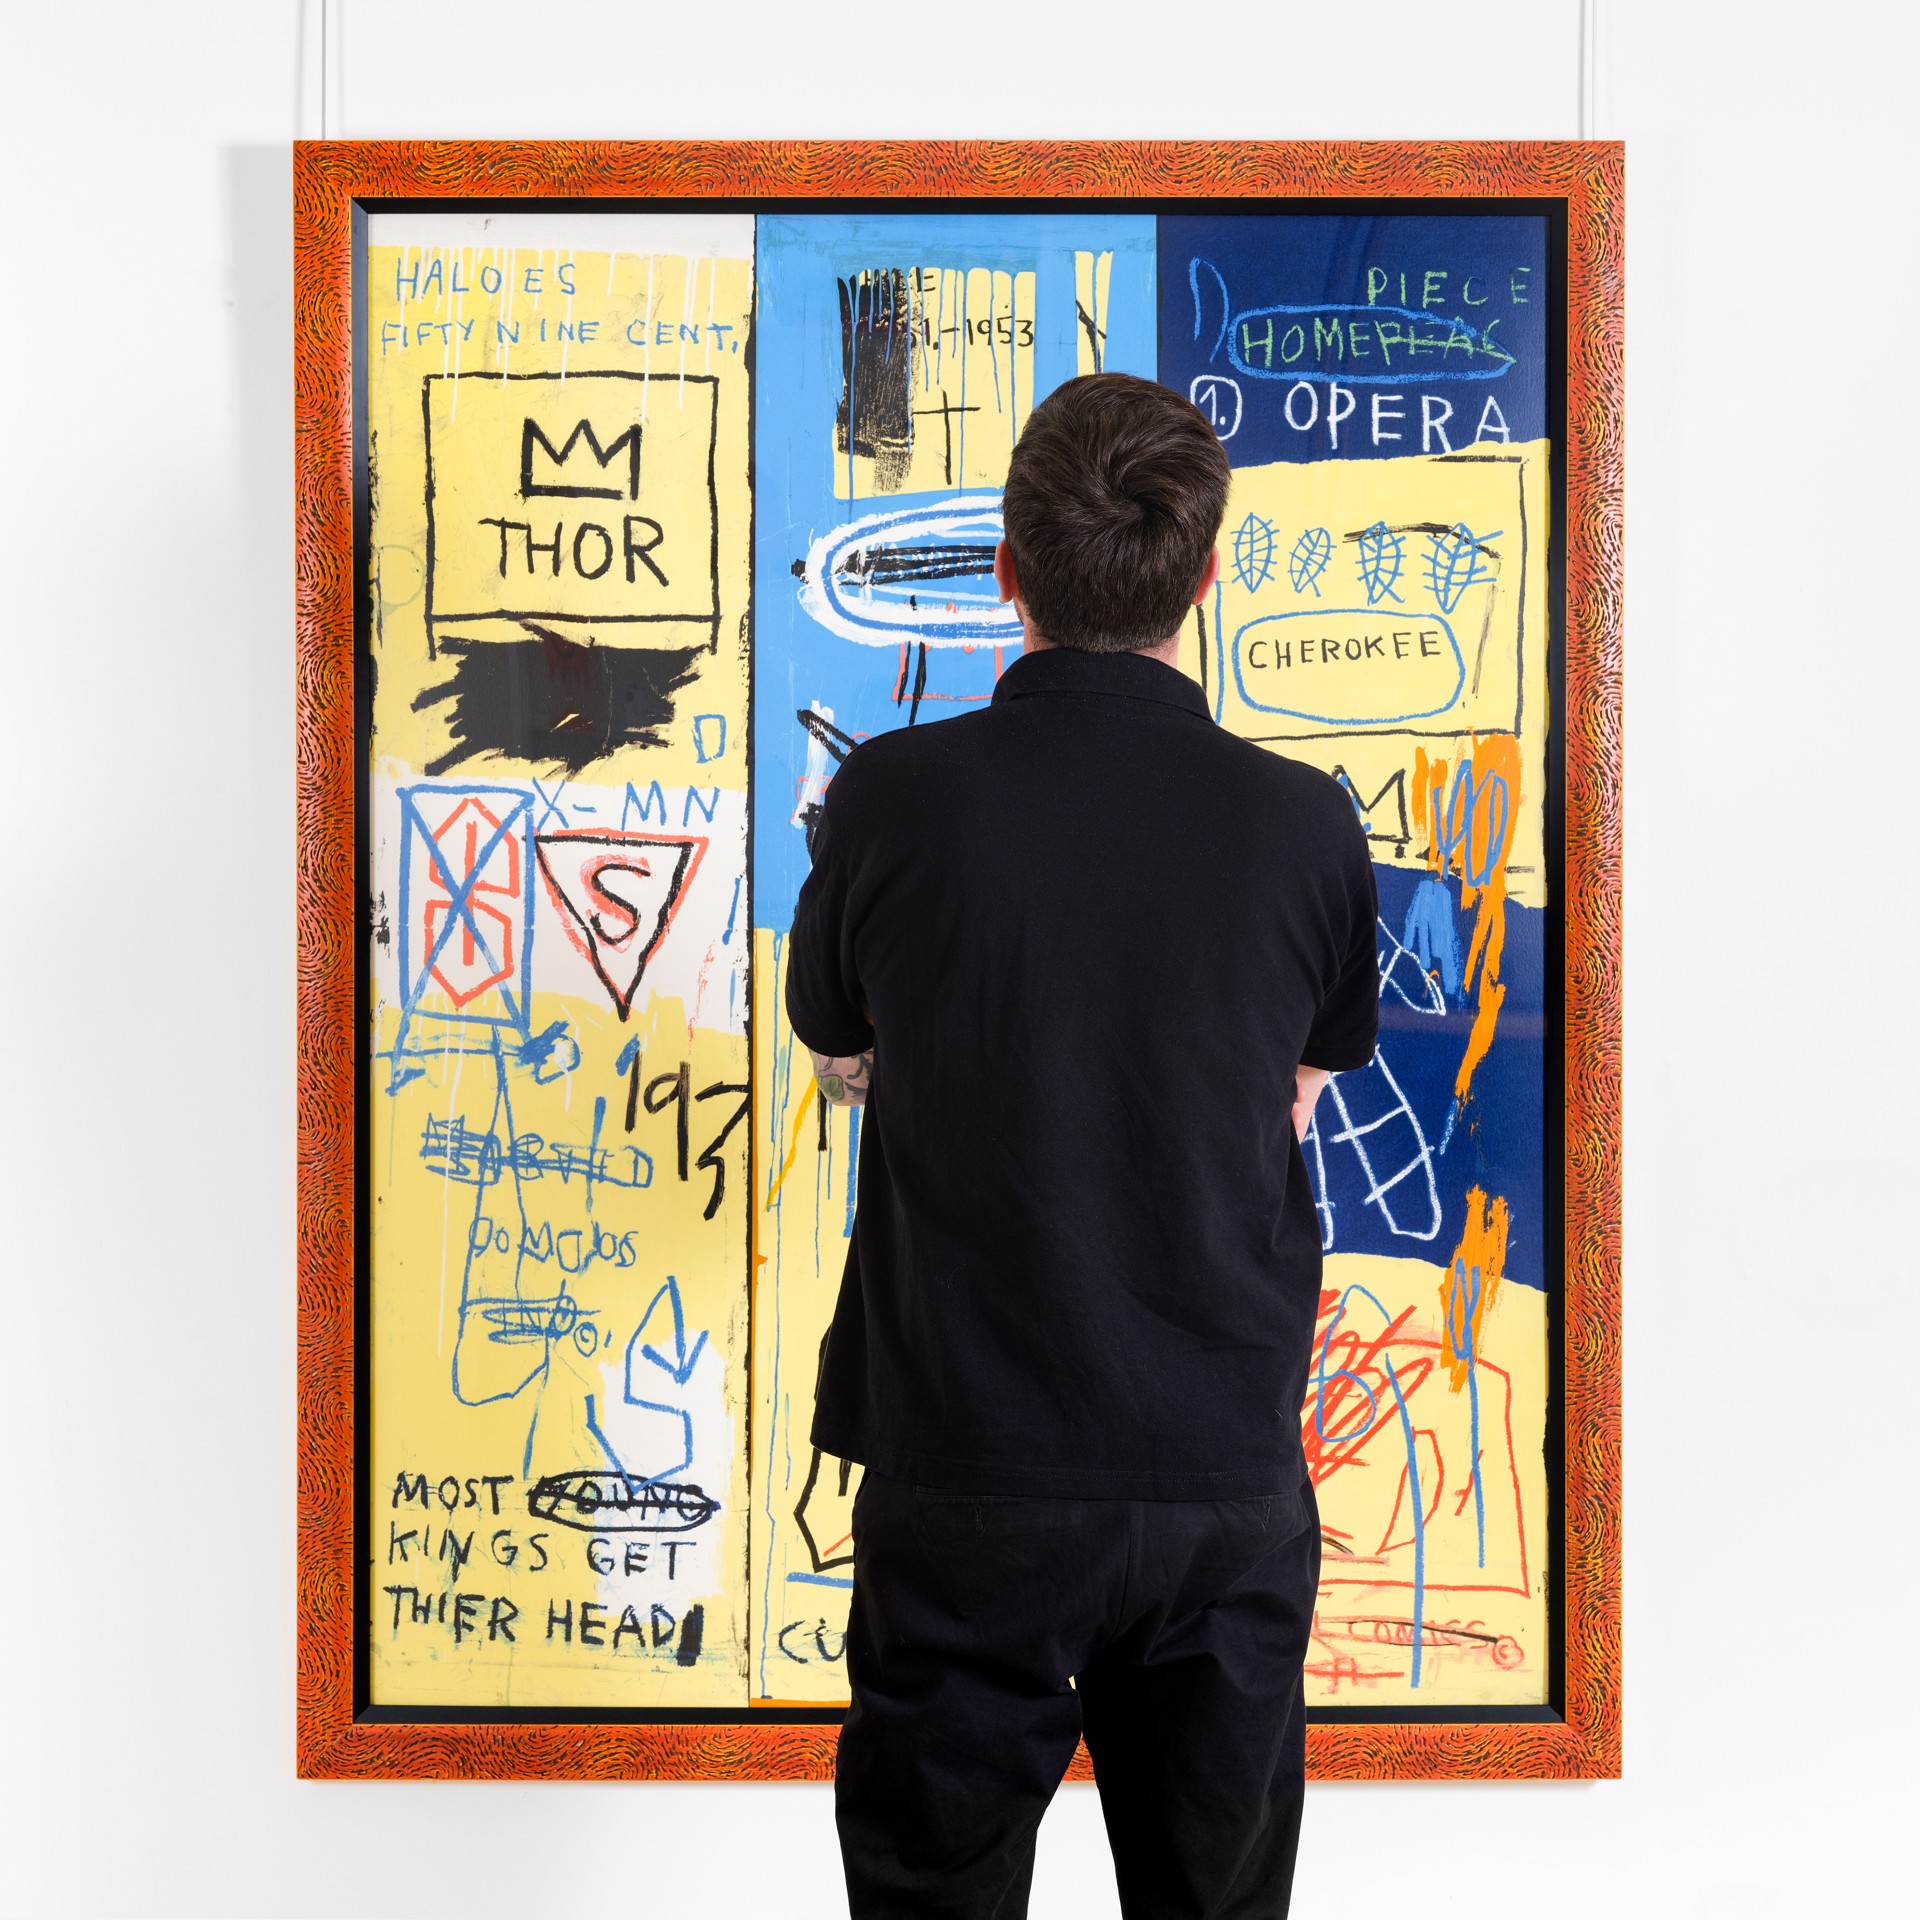 Charles the First (1982) by Jean-Michel Basquiat